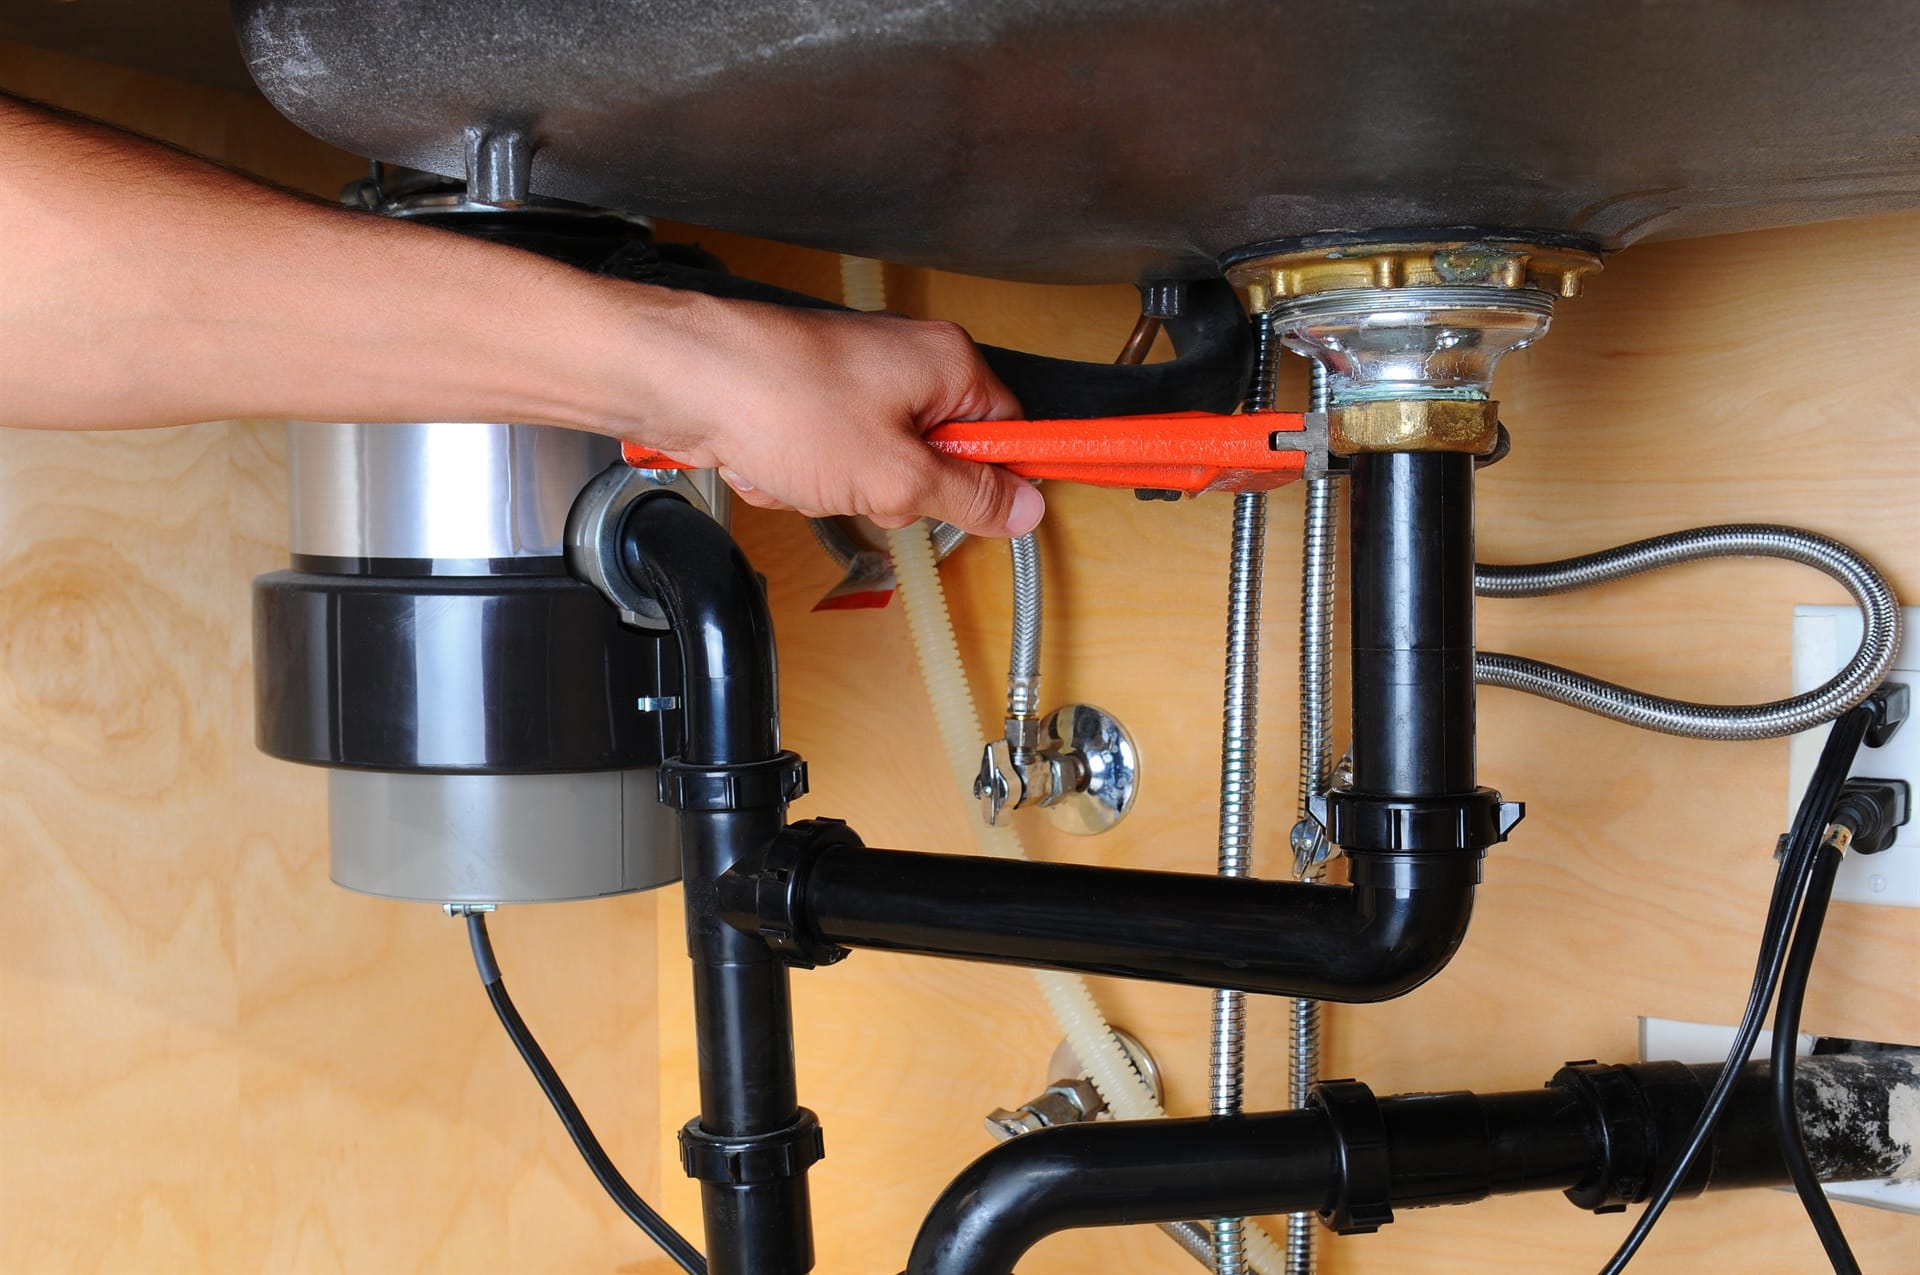 garbage disposal service provided by Wrench It Up plumbing and mechanical